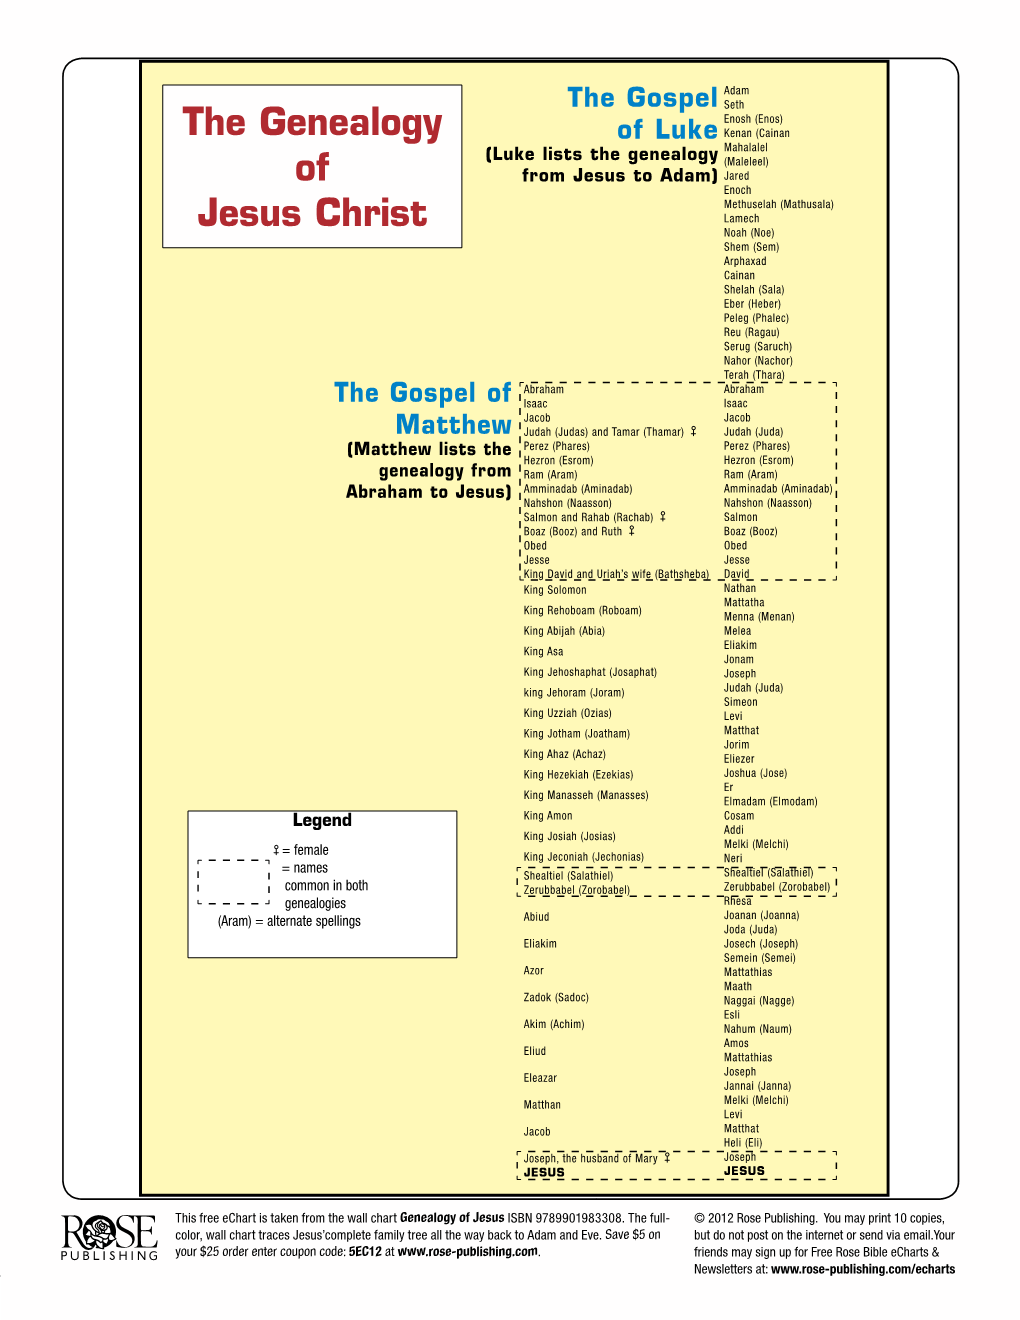 The Genealogy of Jesus Christ Is an Extra Large Laminated Wall Chart That Traces Jesus’ Complete Family Tree All the Way Back to Adam and Eve